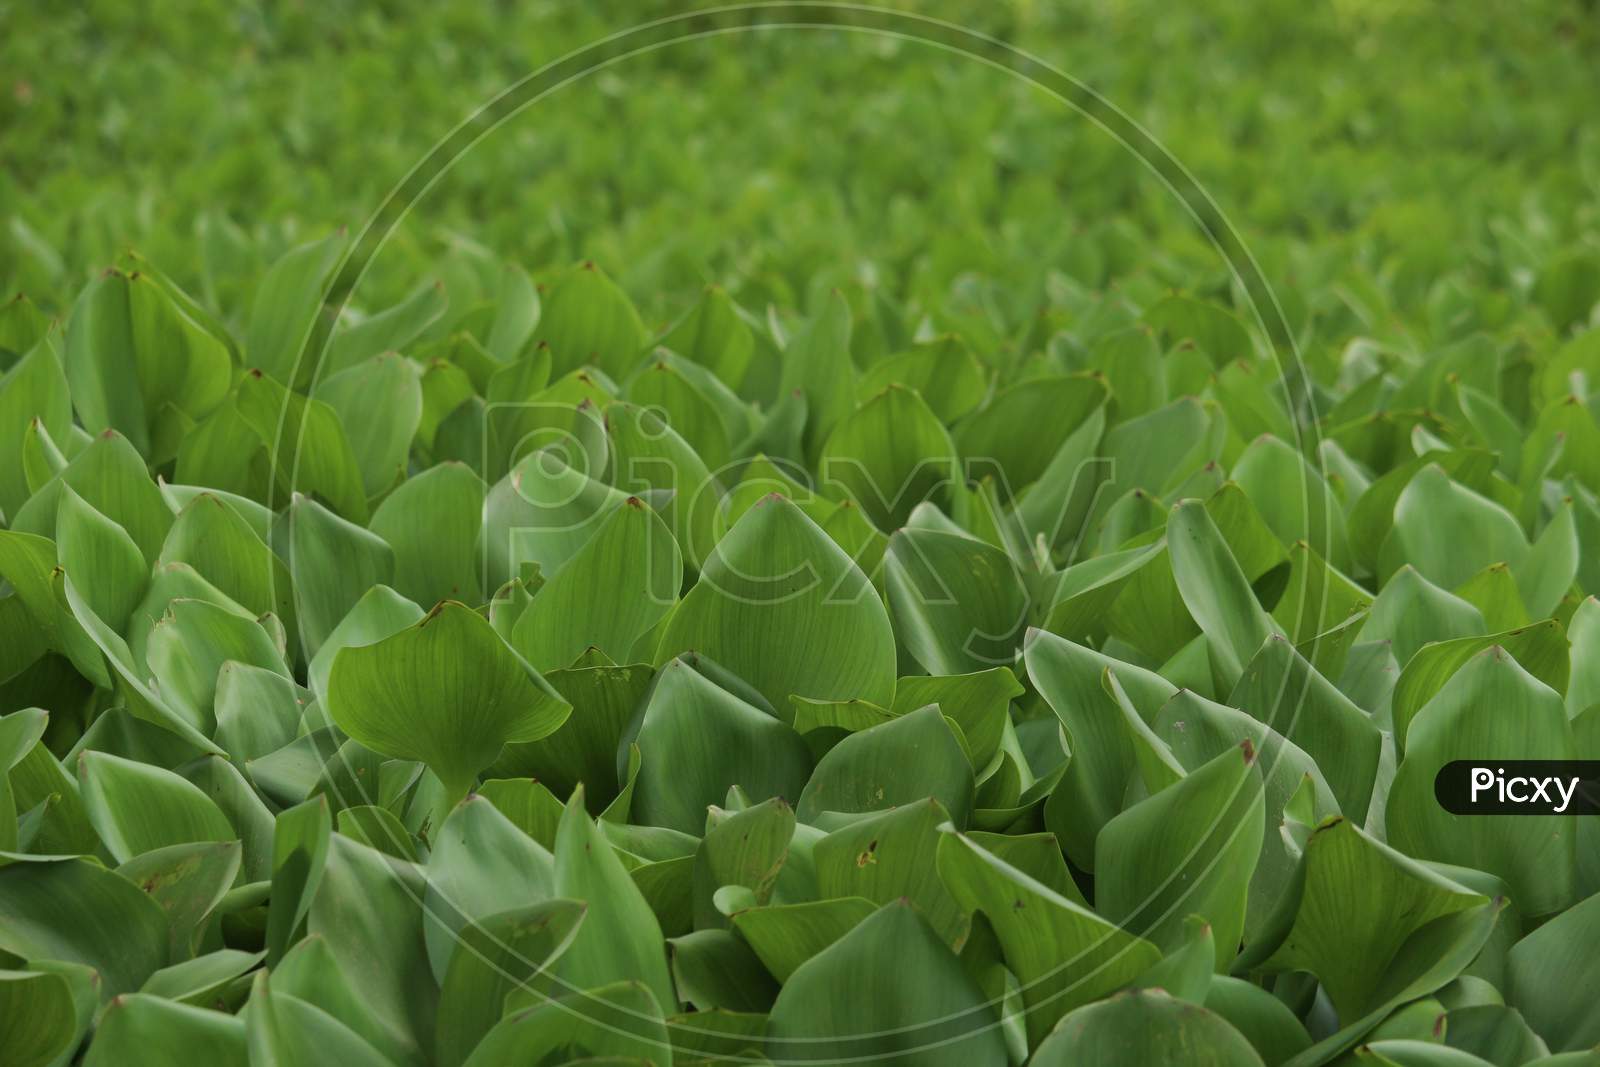 Eichhornia Crassipes Is Commonly Known As Water Hyacinth And It Is An Aquatic Plant